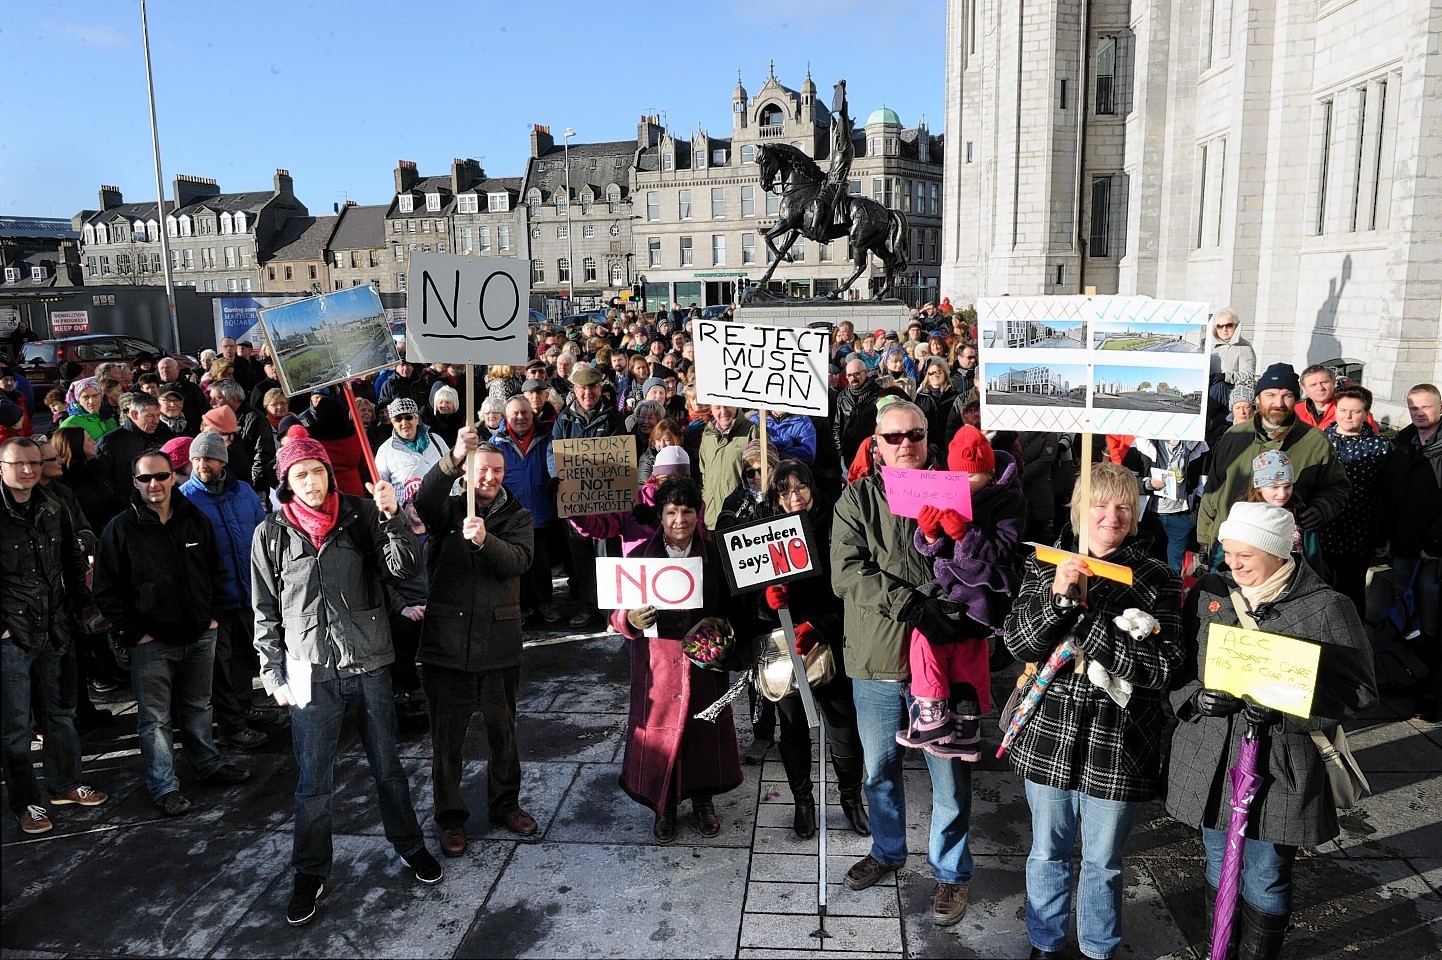 The Marischal Square demonstration on January 24